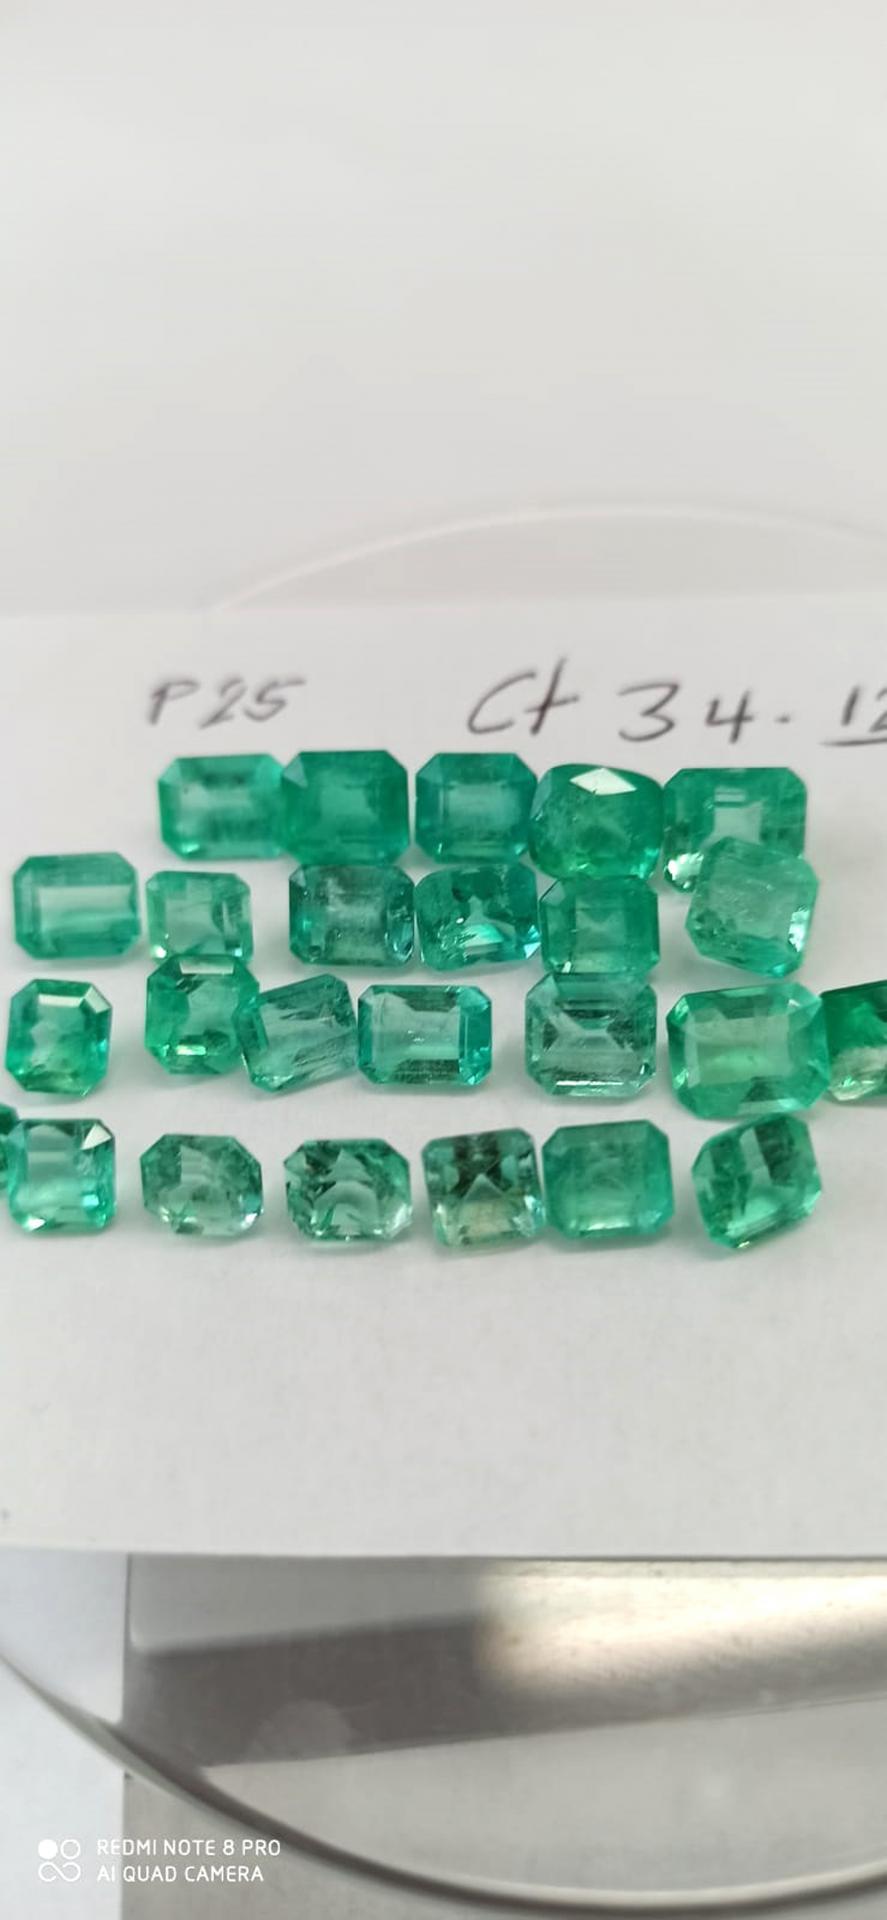 34.12 Ct.  Colombian Emerald  Lot 